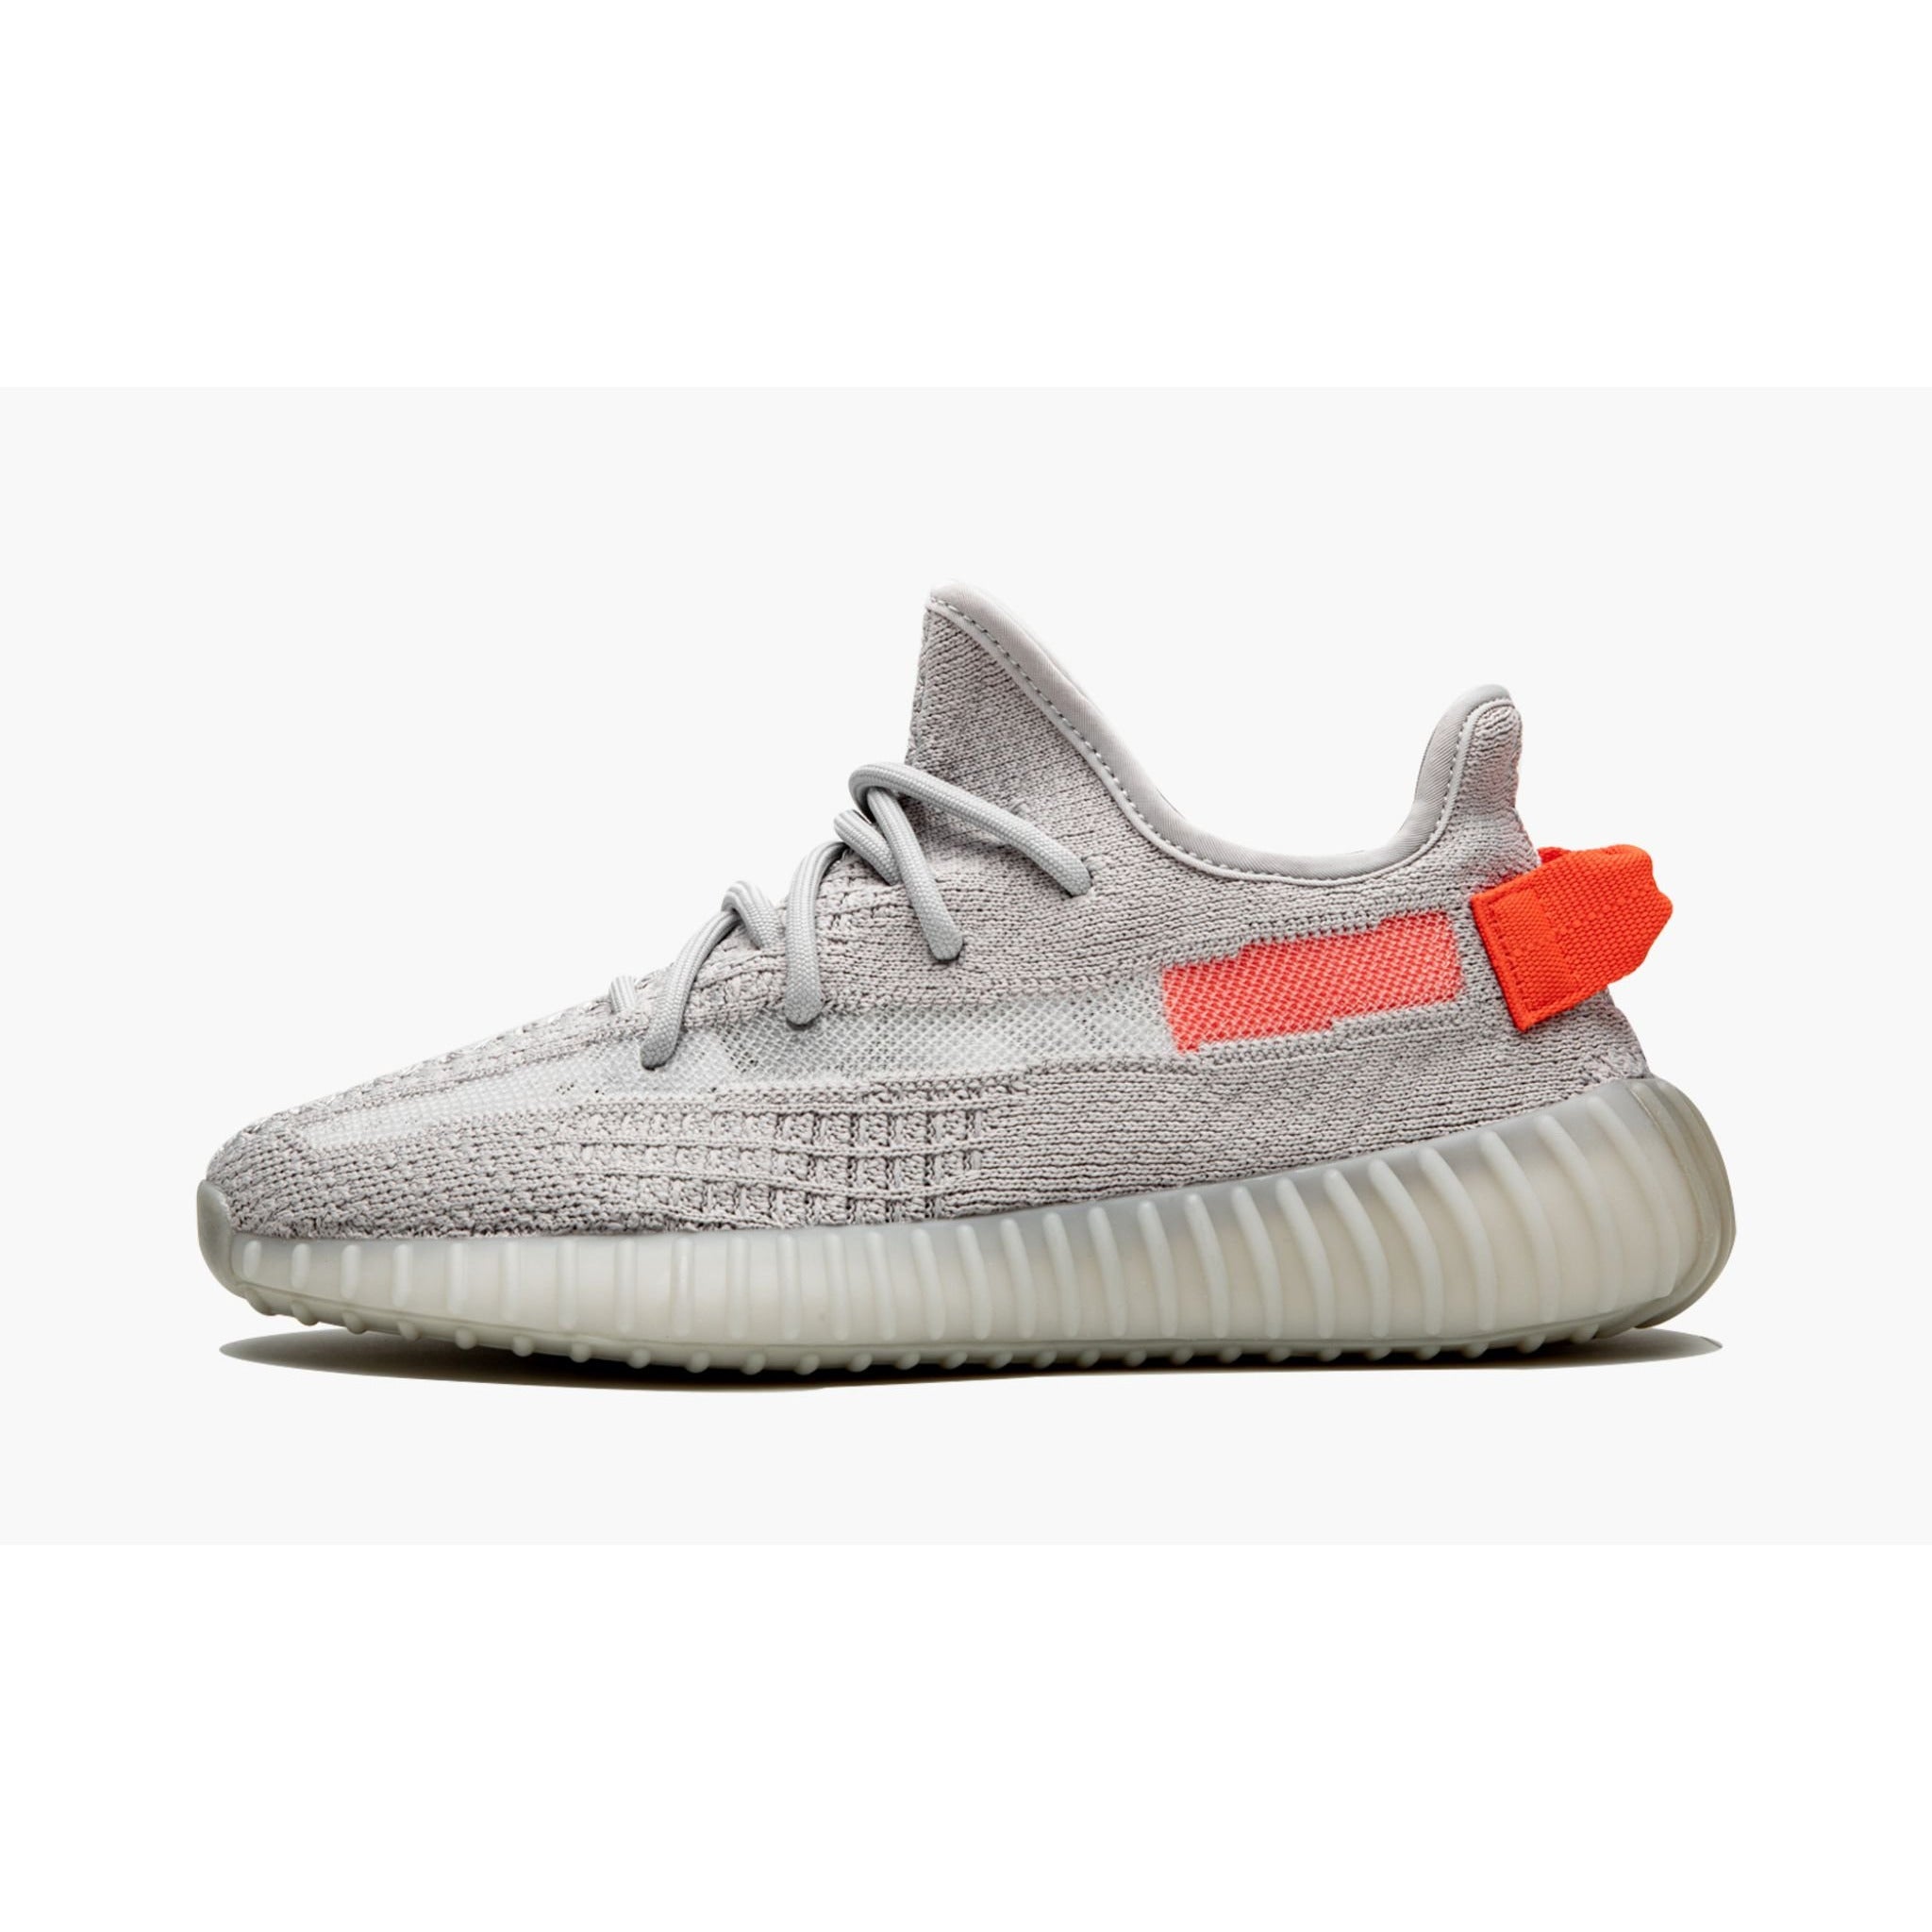 YEEZY BOOST 350 V2 "Tail Light" - Manore Store